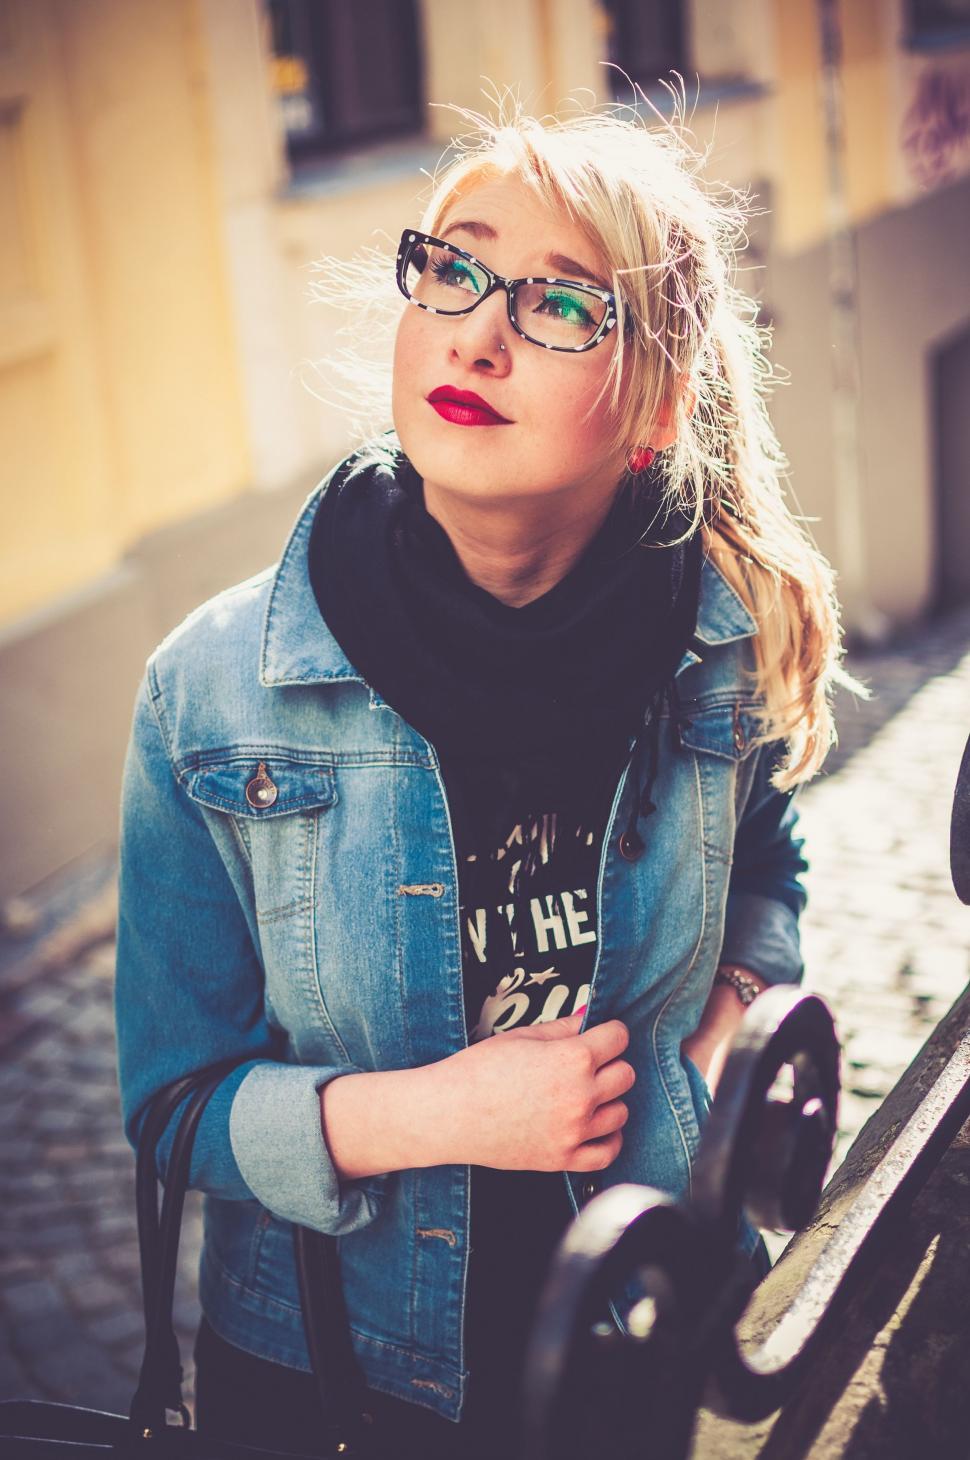 Free Image of Woman Wearing Glasses and Denim Jacket 